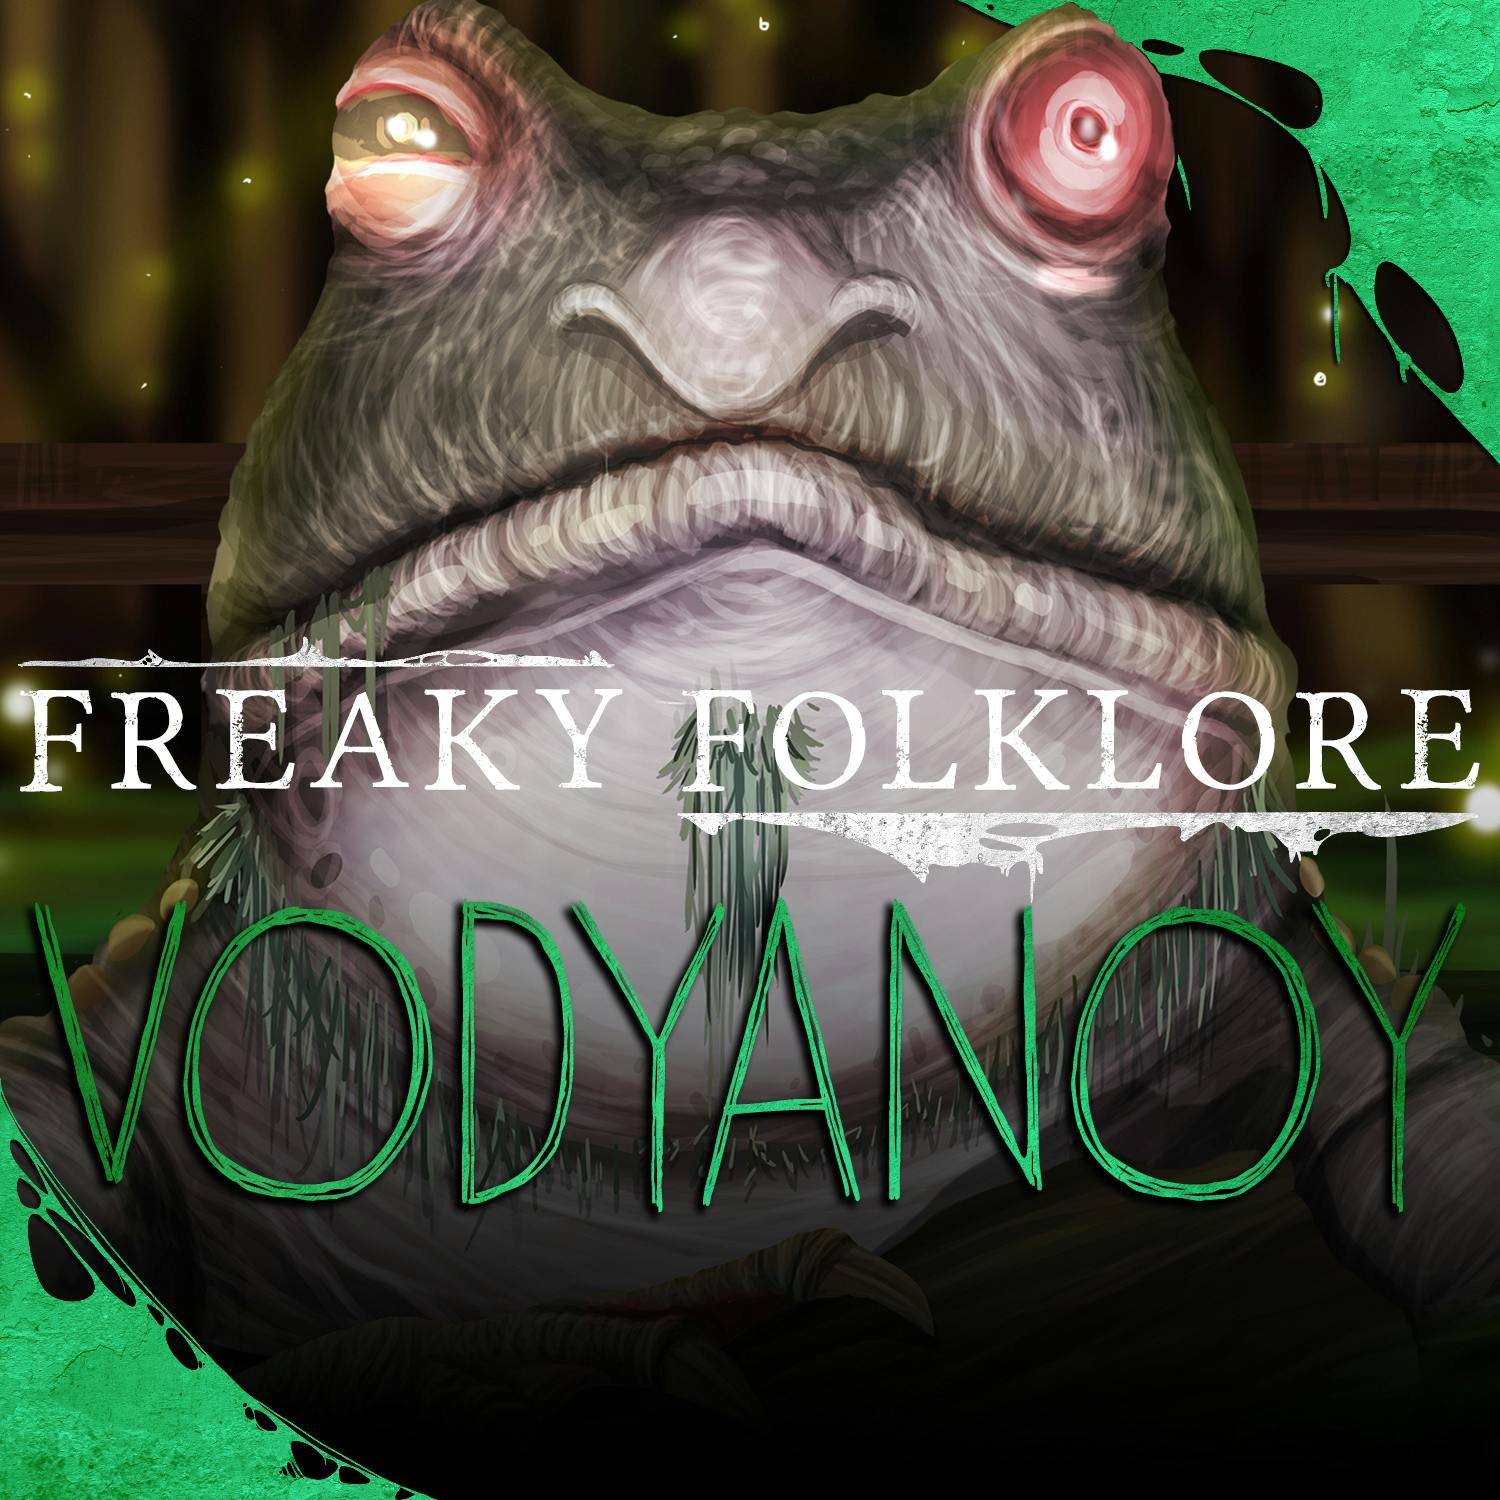 Vodyanoy - Tyrant Monster of the Water